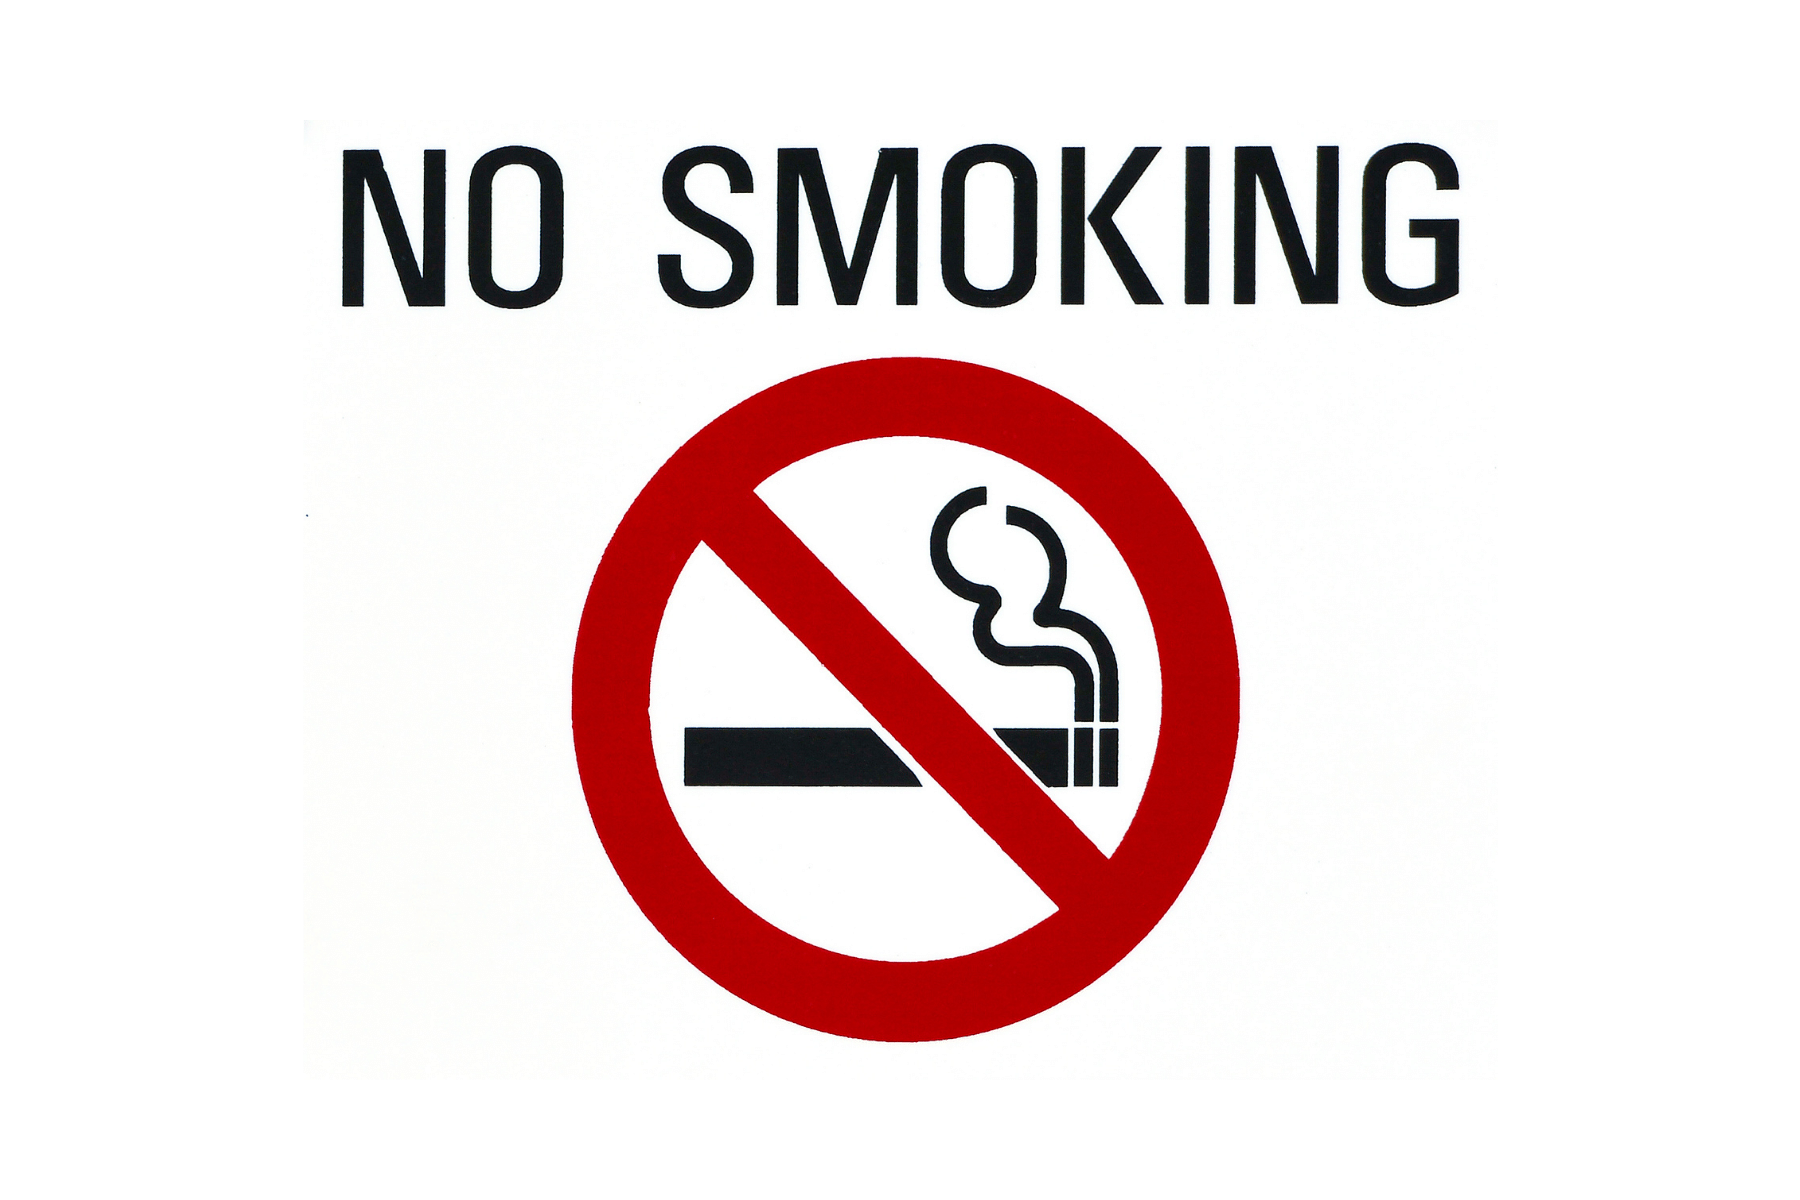 cigarette with the red cross out symbol and says no smoking